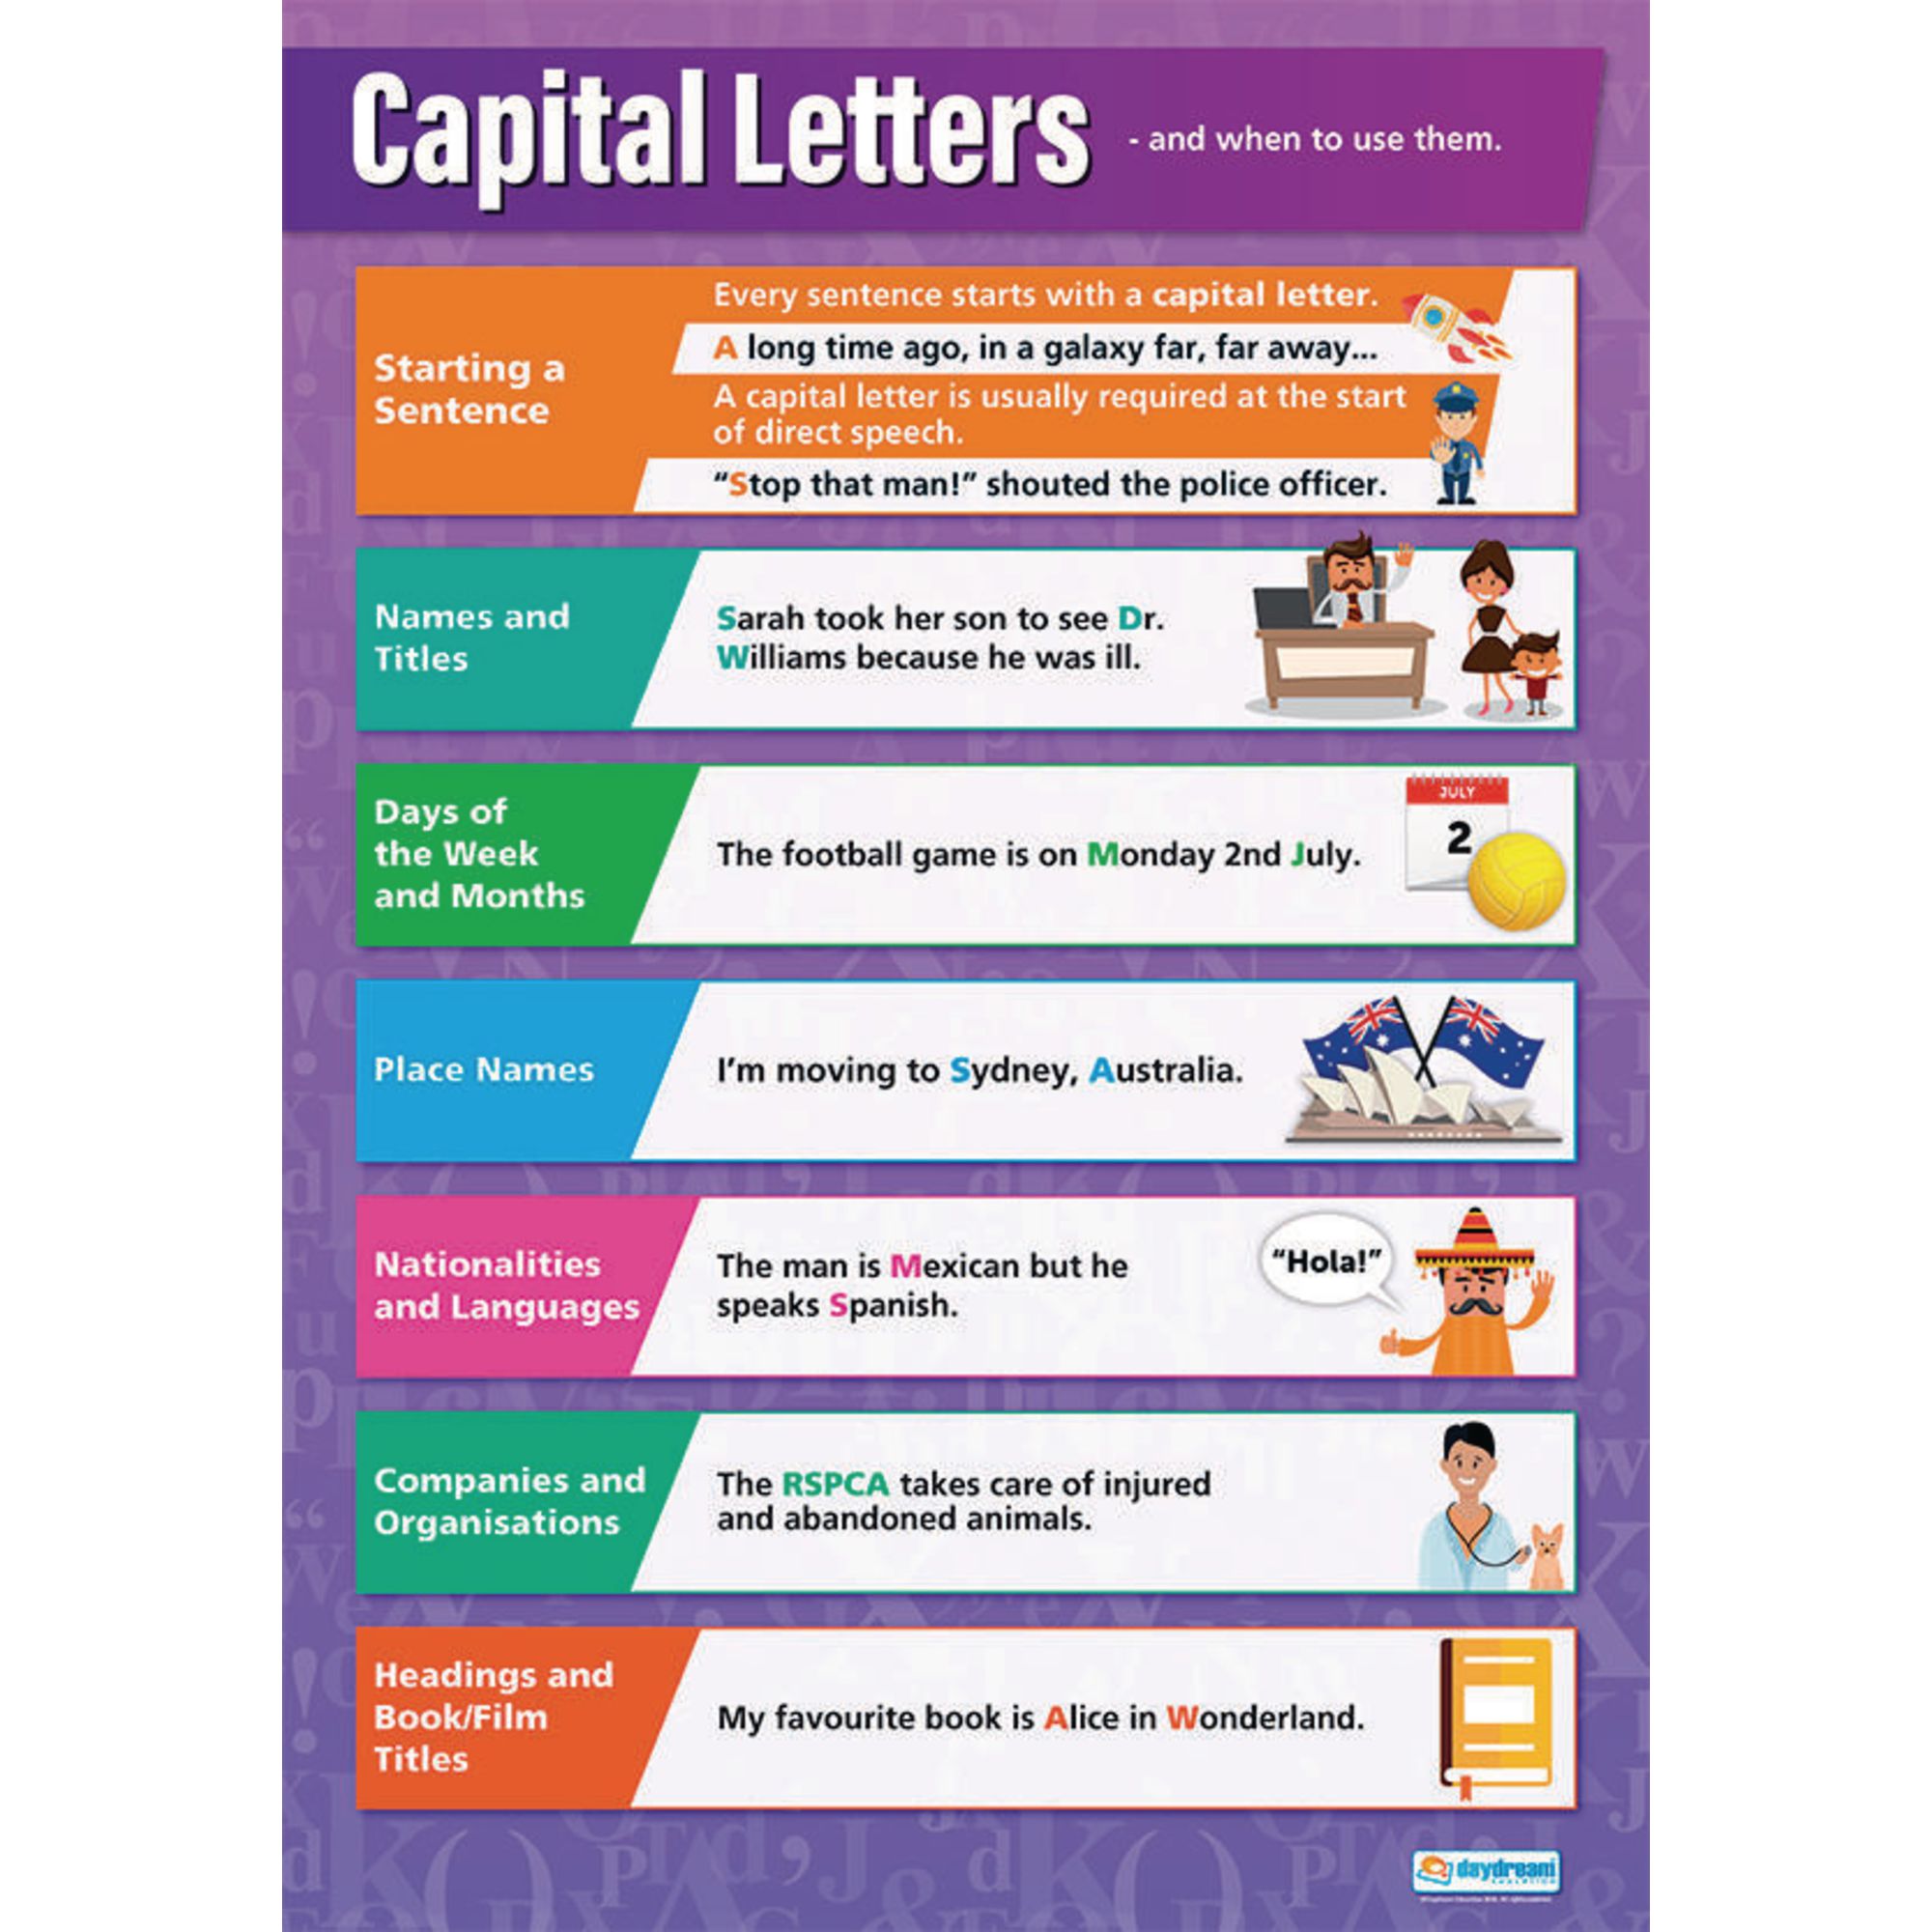 g1377610-capital-letters-poster-gls-educational-supplies